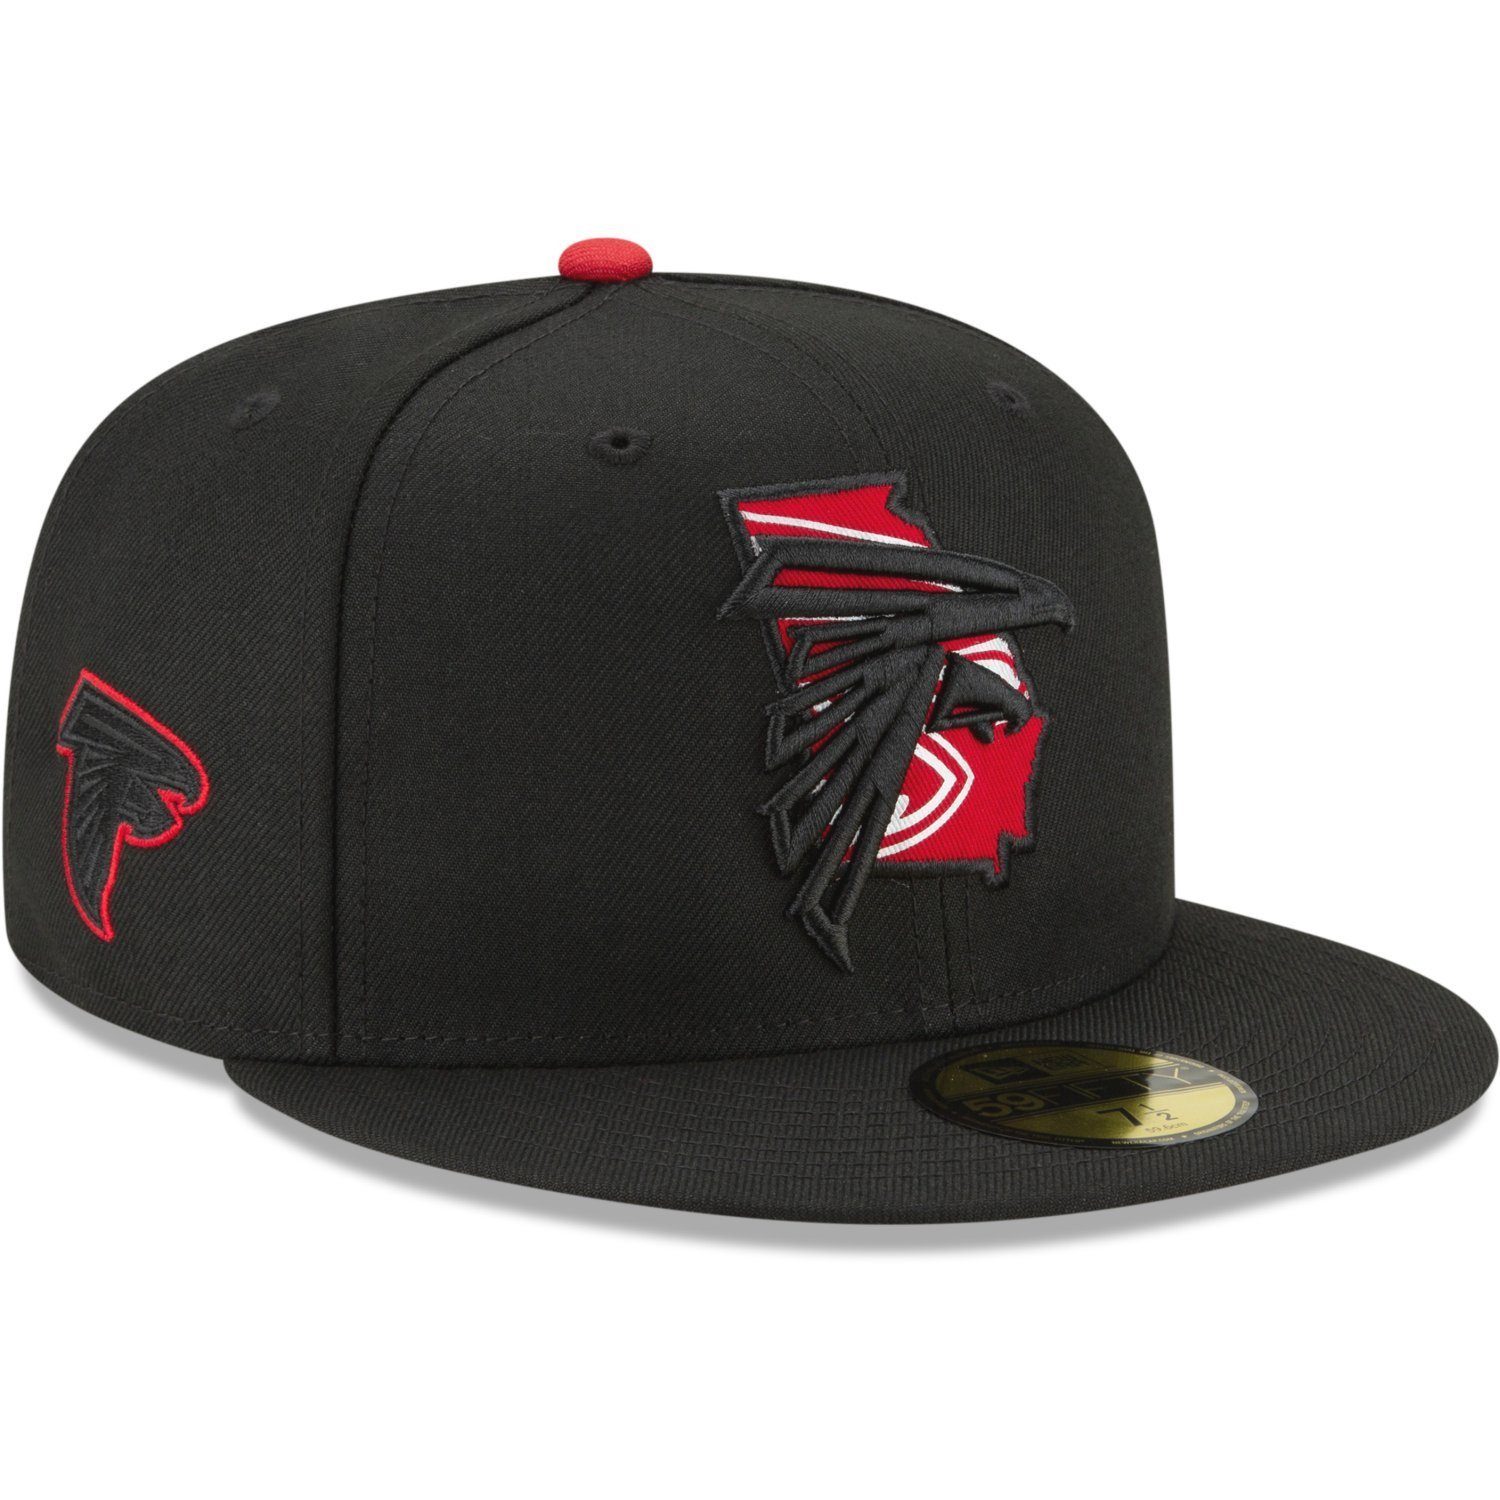 New Era Fitted Teams Atlanta Falcons NFL LOGO Cap 59Fifty STATE